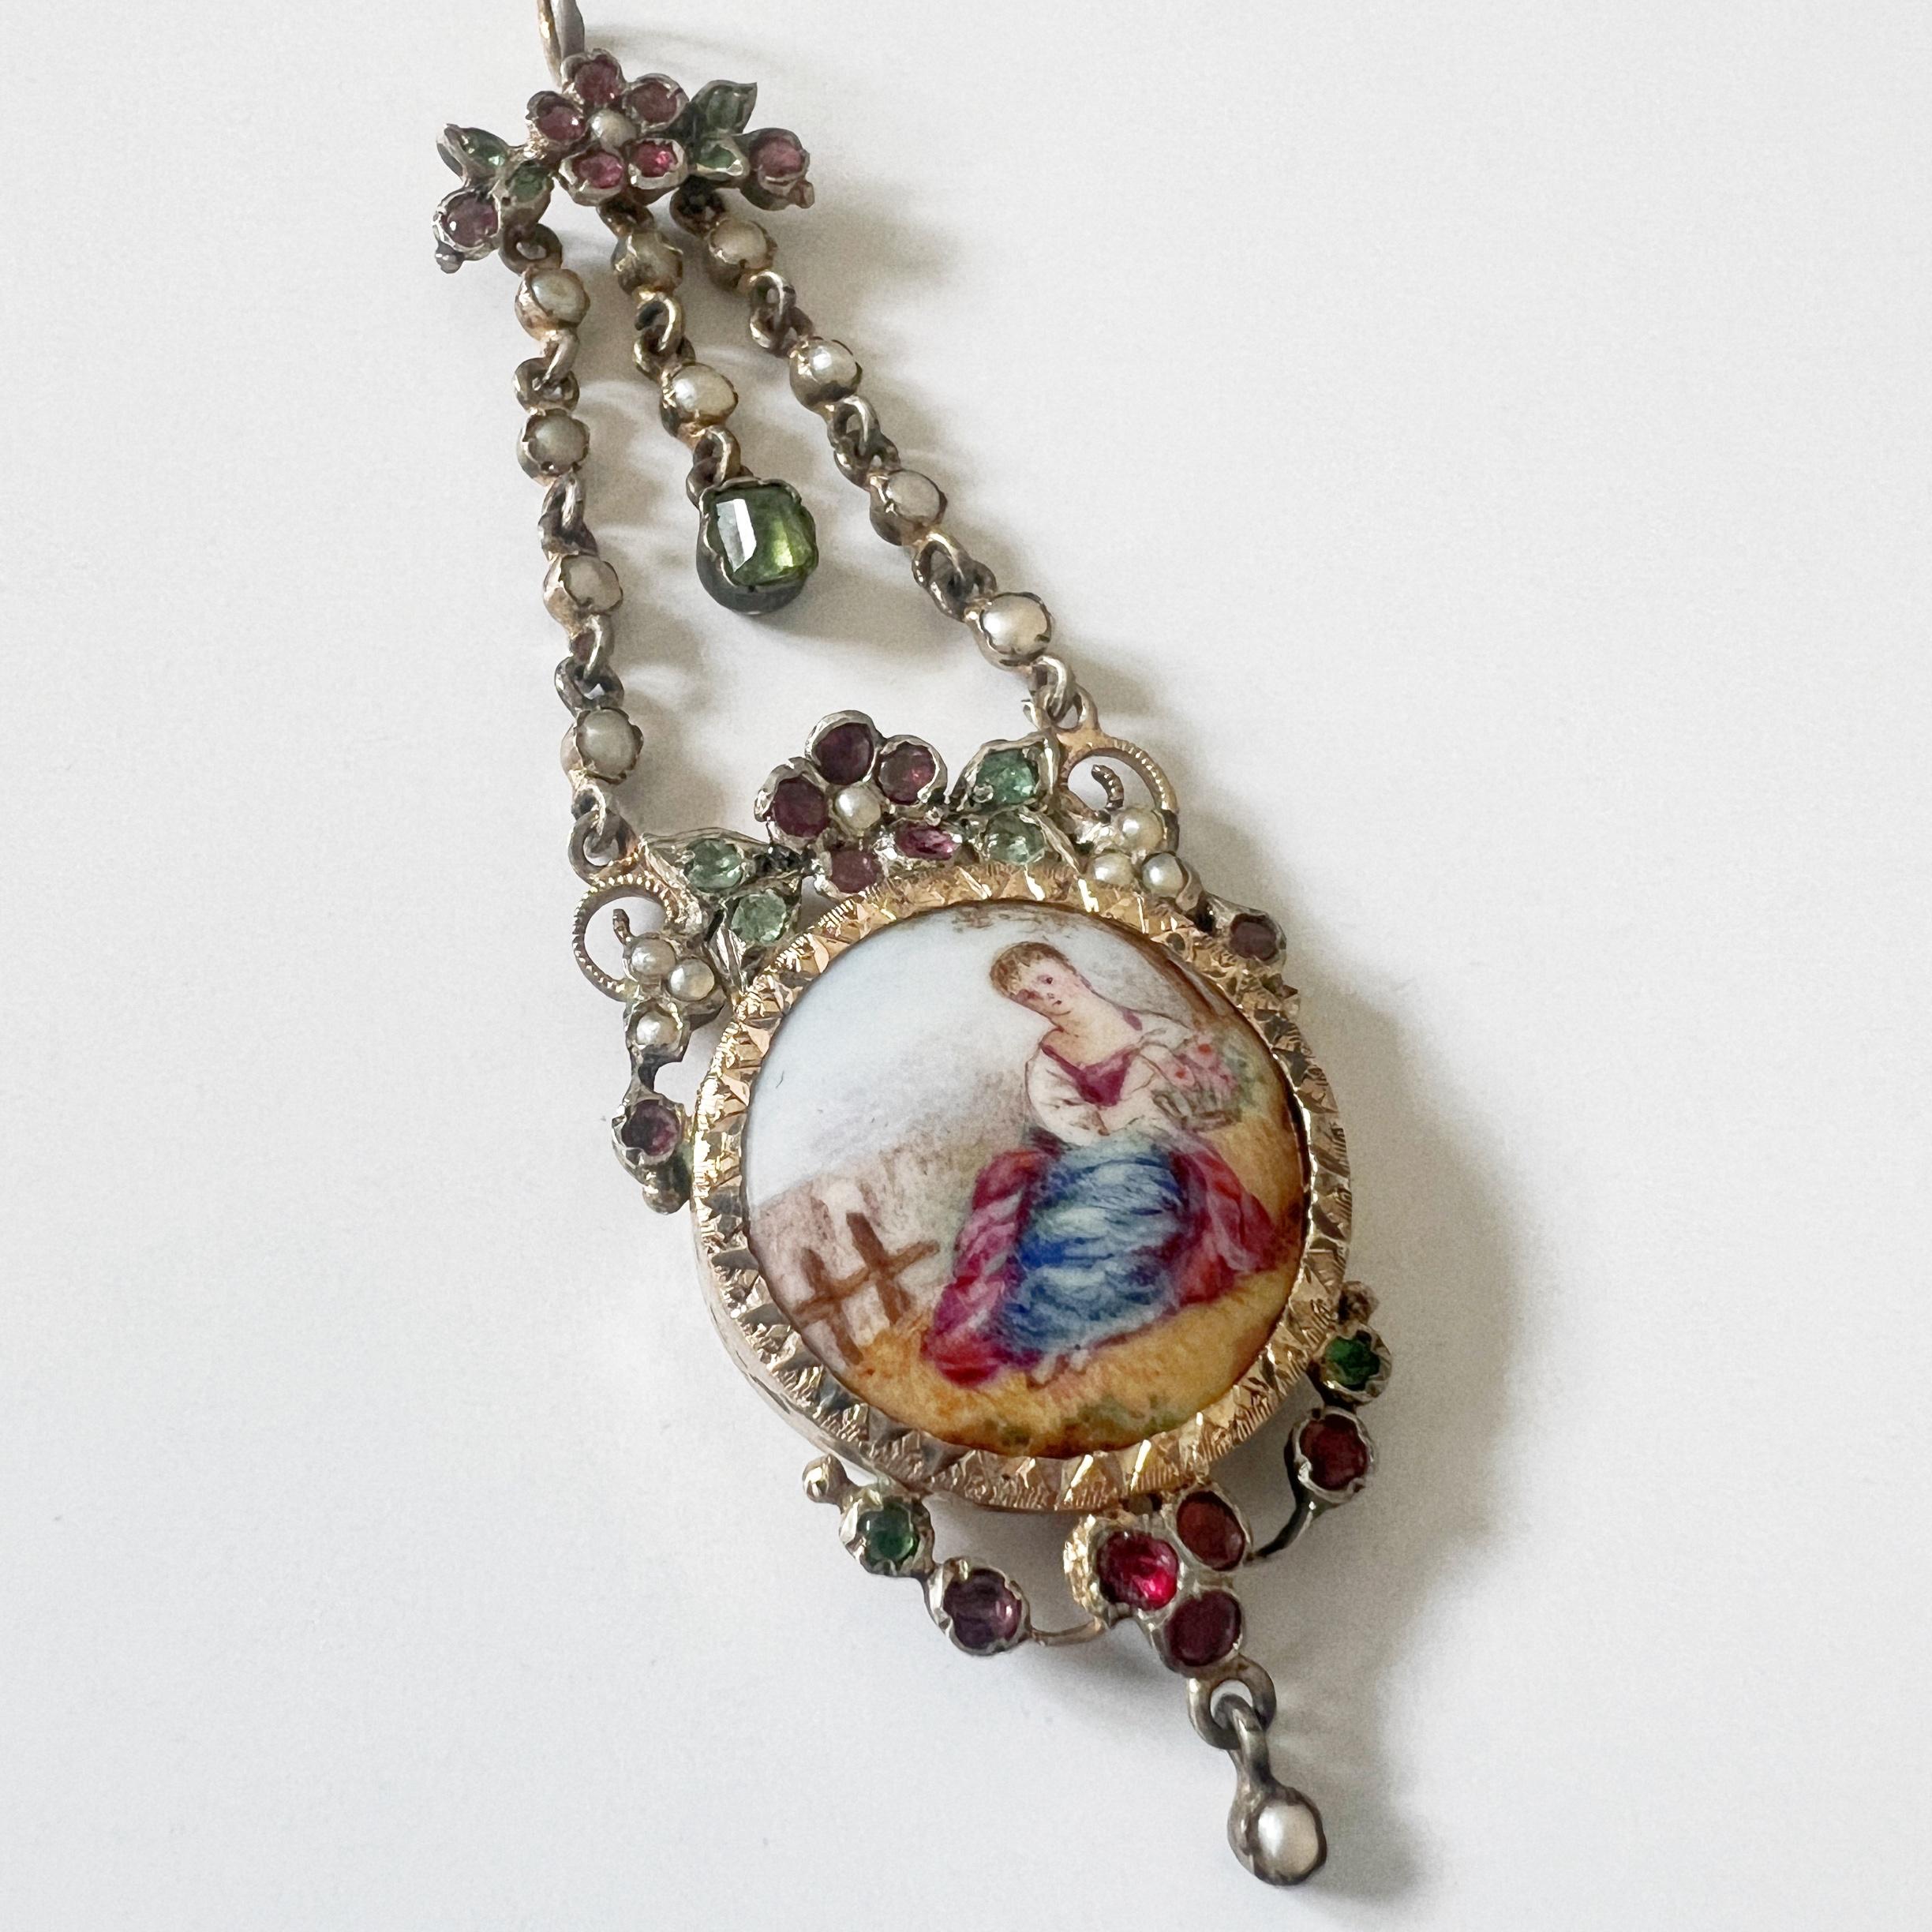 For sale a beautiful Victorian era miniature portrait pendant, featuring a round enamel panel capturing the image of a young girl, adorned in a captivating long dress in delicate shades of pink and blue.

The young girl's hands, delicately holding a